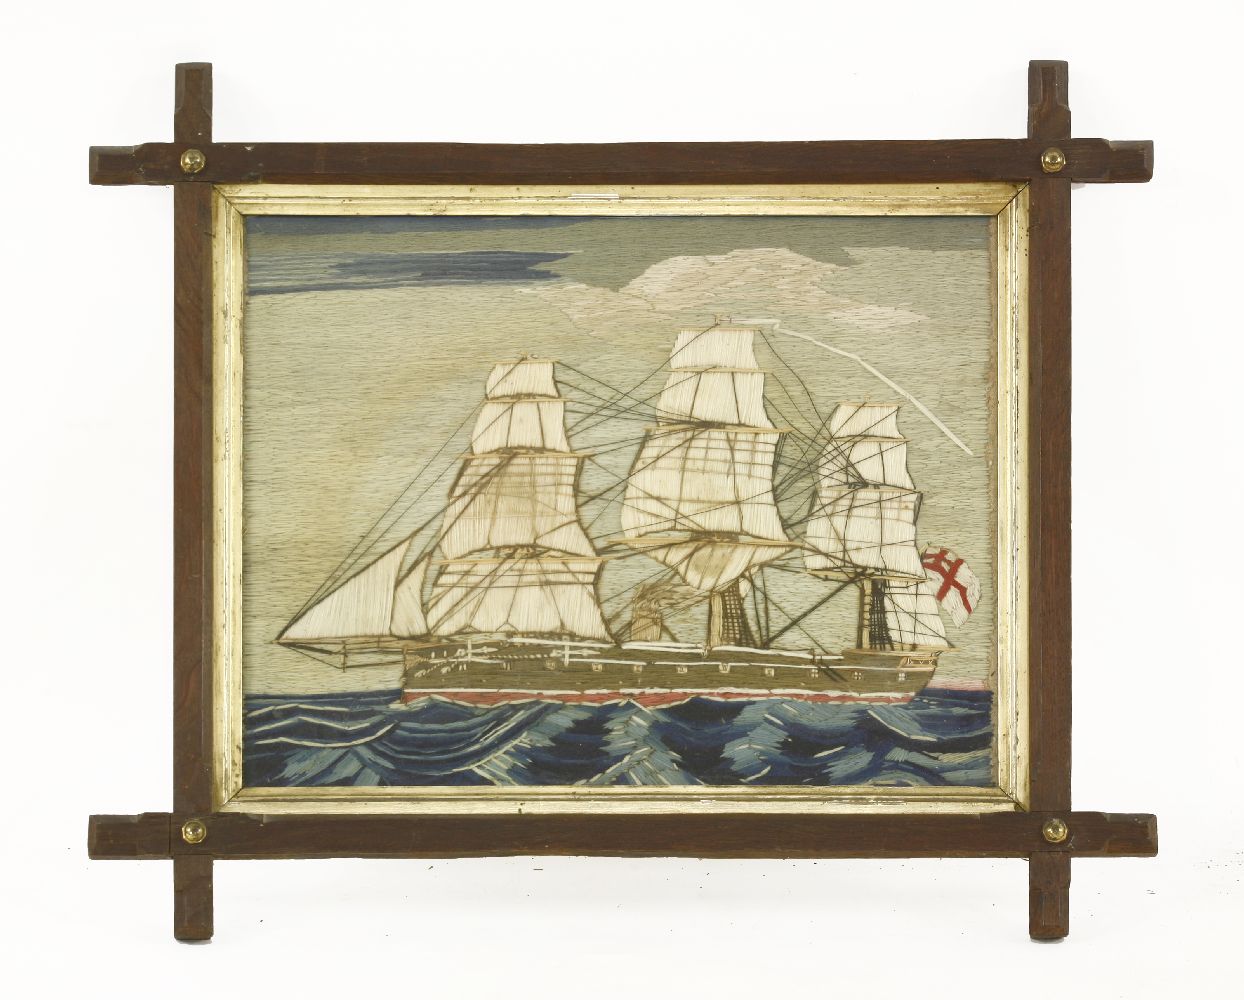 A Victorian needlework of a three-masted steam yacht in full sail, image 35 x 45cm, in an oak frame